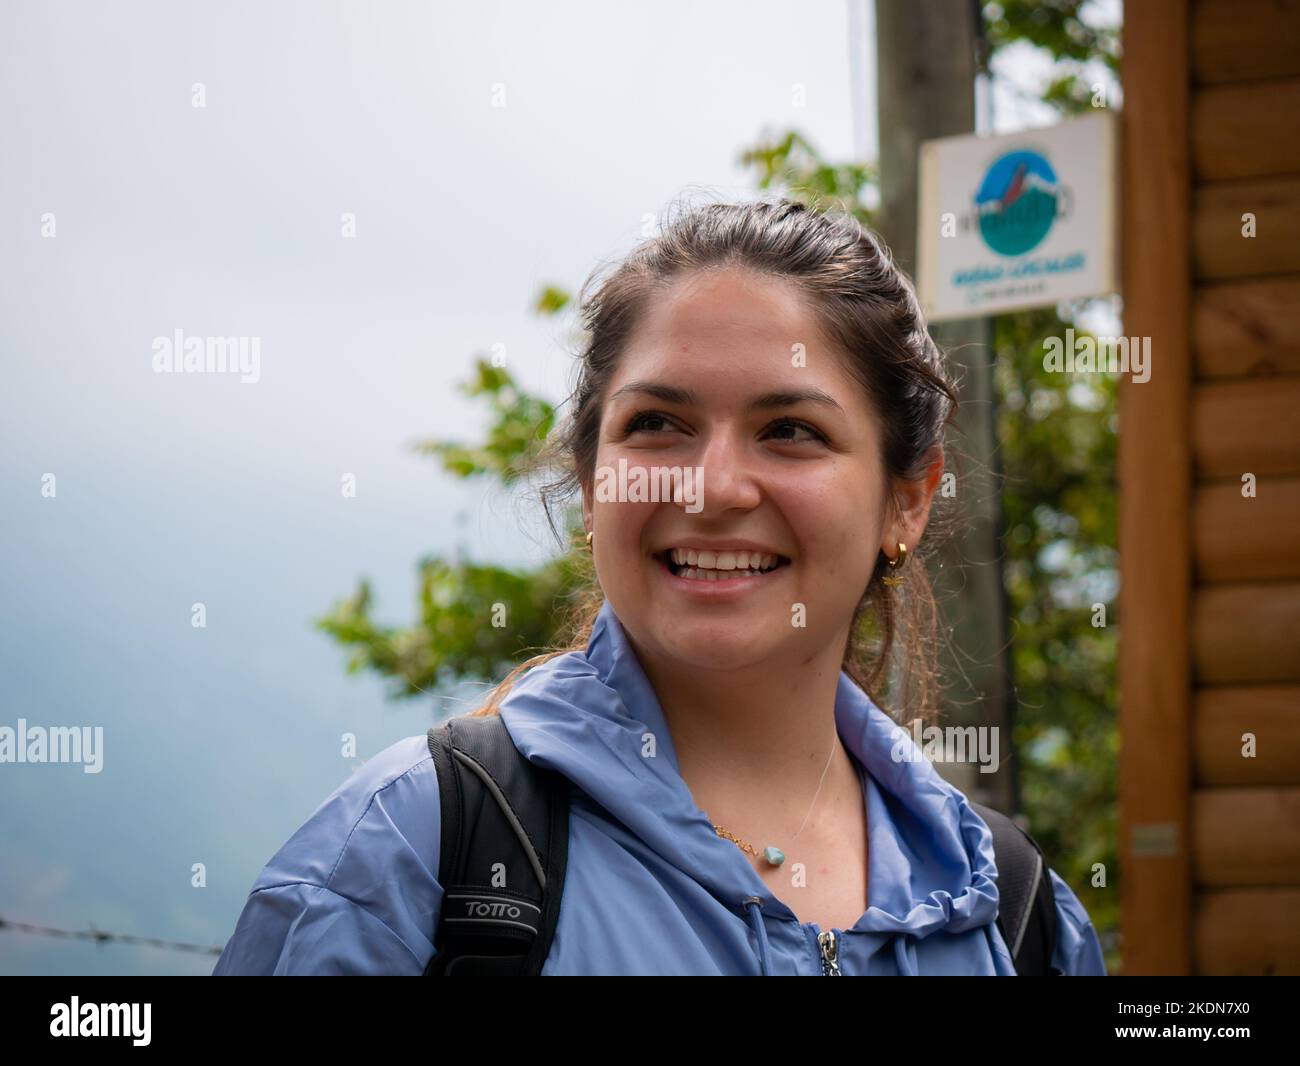 Envigado, Antioquia, Colombia - February 27 2020: White Young Girl Smiles at her Friend Stock Photo